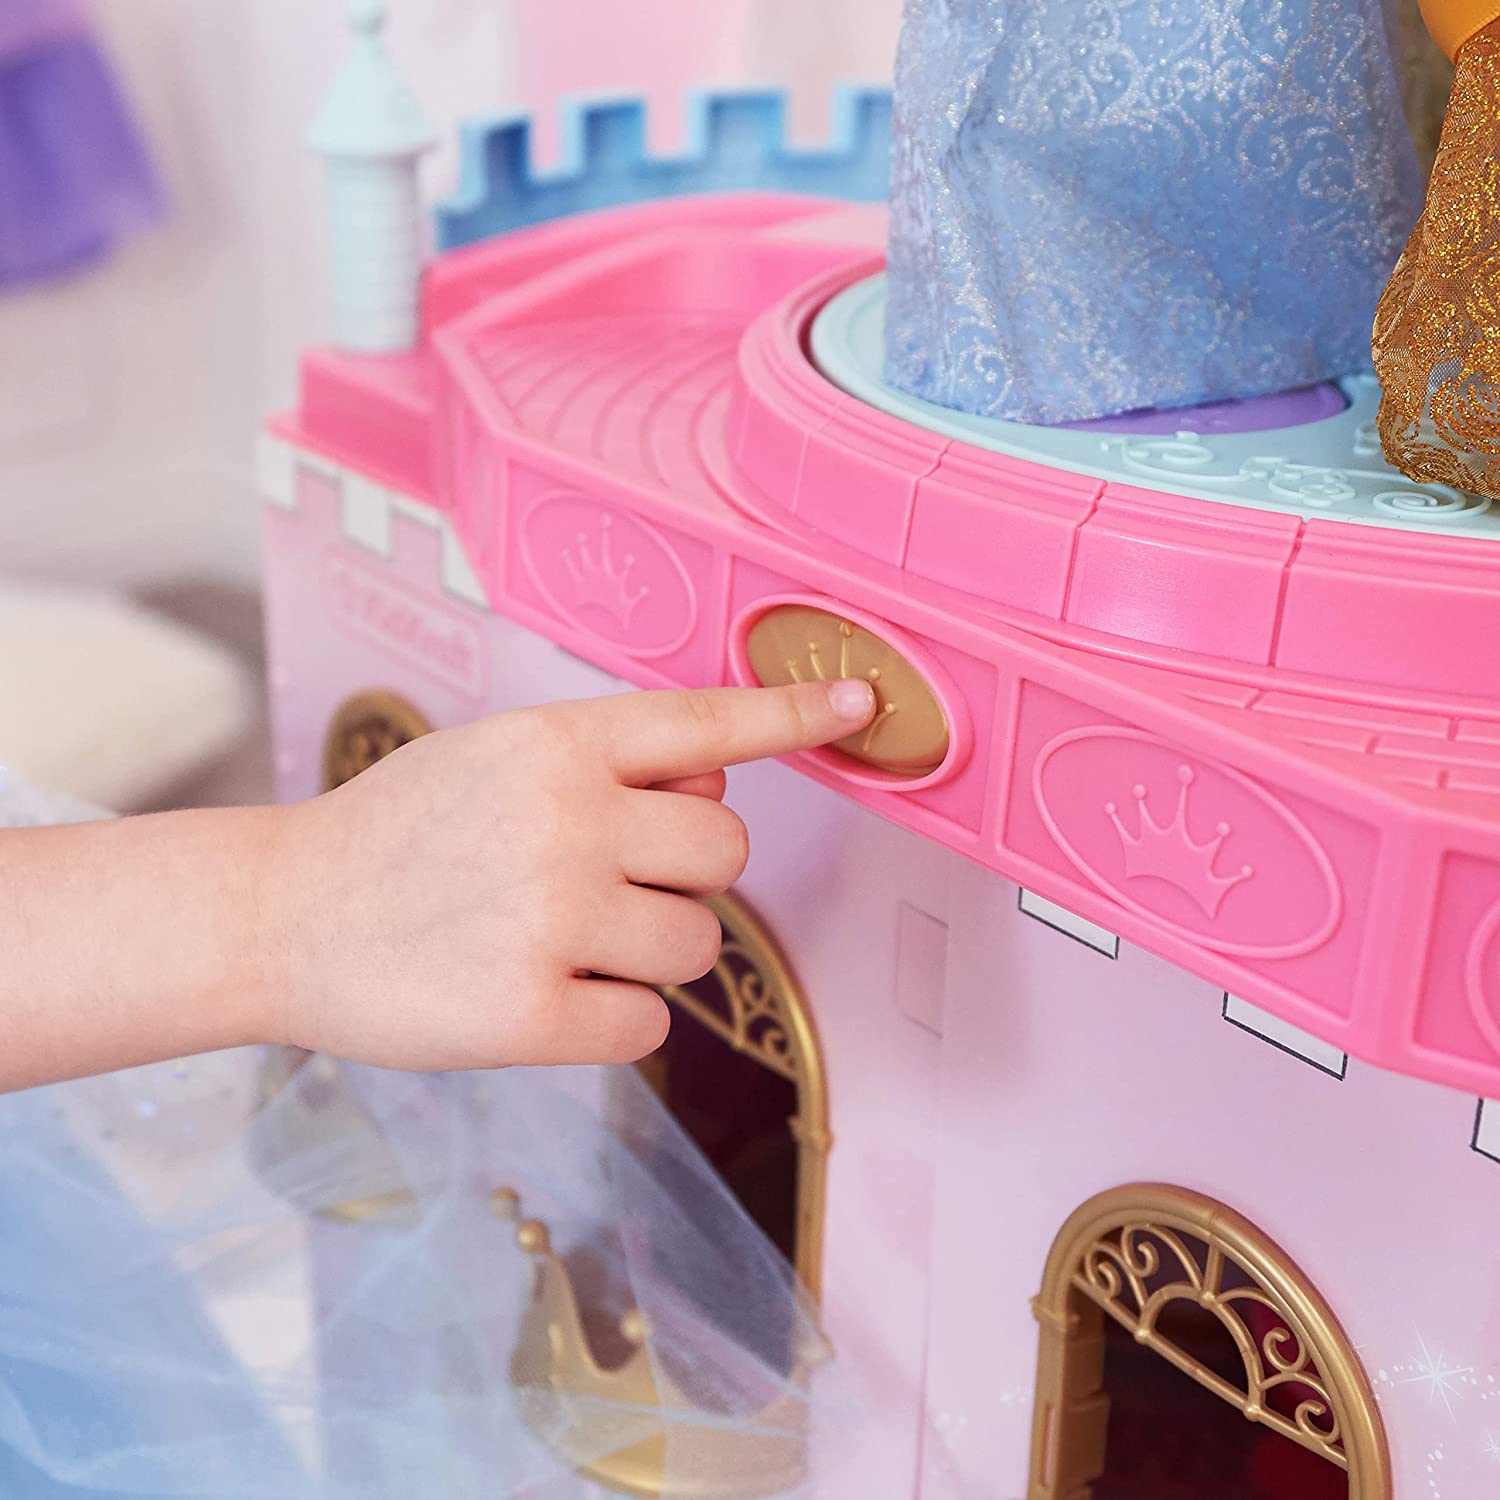 Disney Princess Play Kitchen Includes 20 Accessories, over 3 Feet Tall 